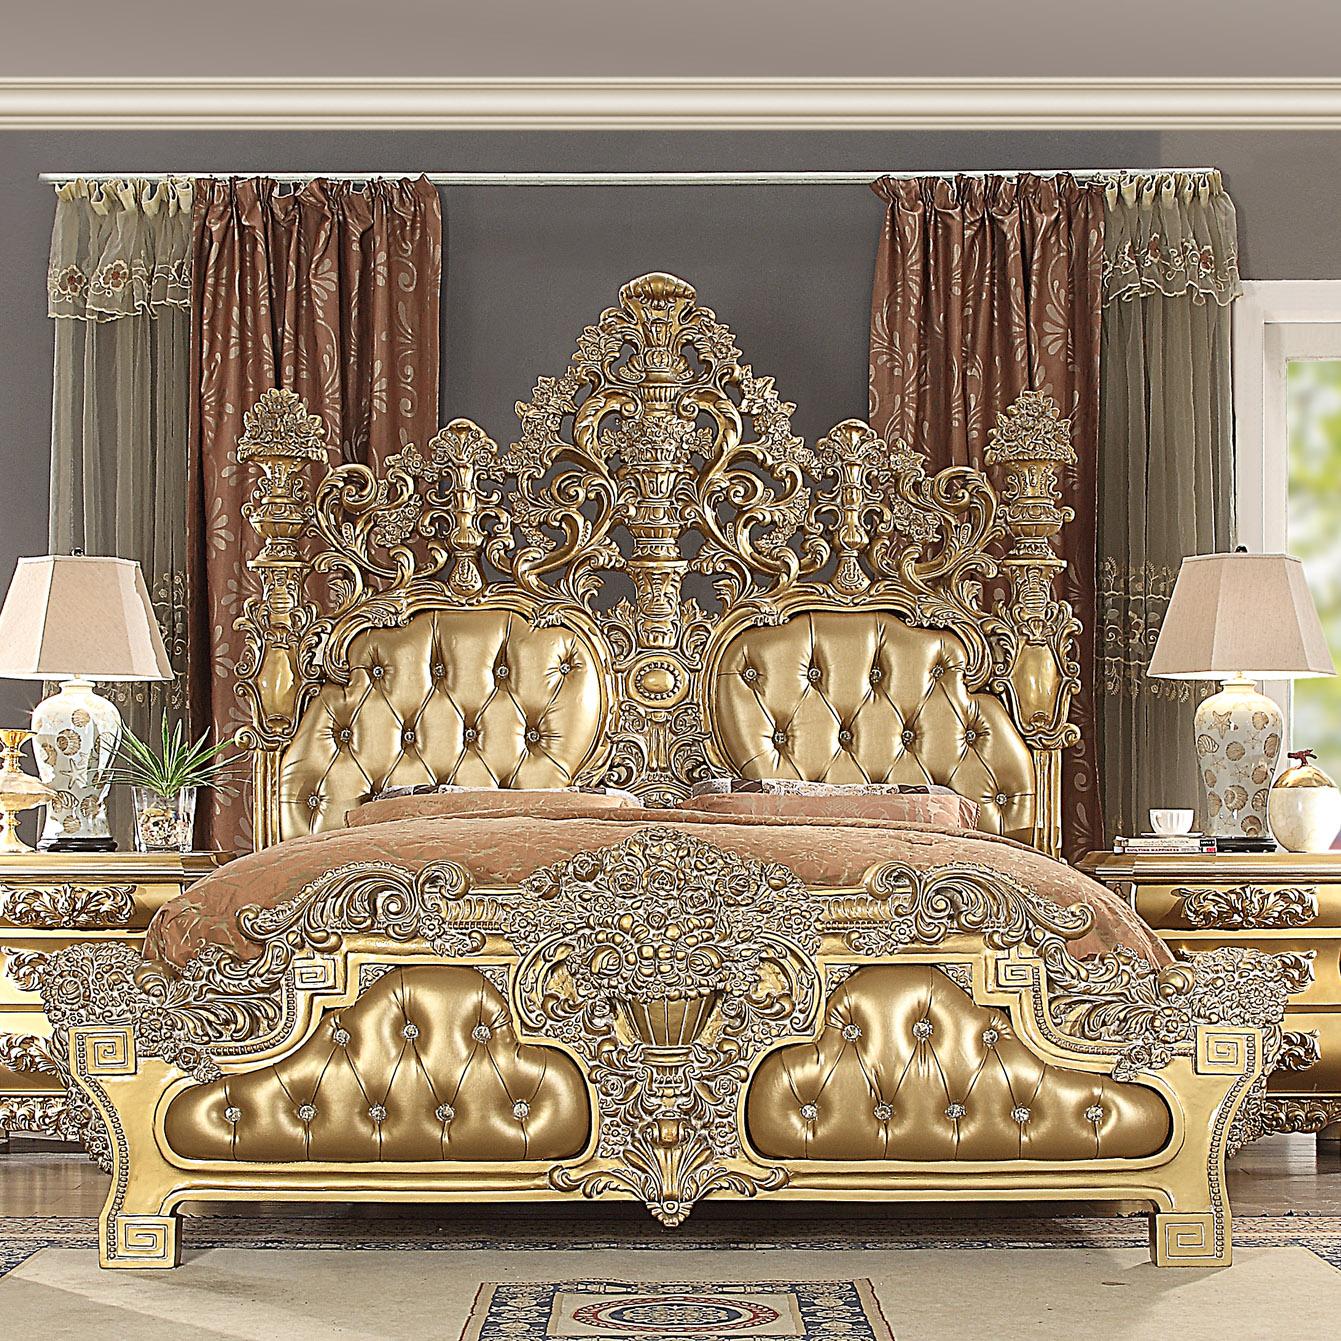 Traditional Panel Bed HD-8016 – CK BED HD-8016 CK BED in Rich Gold, Gold Finish Leather